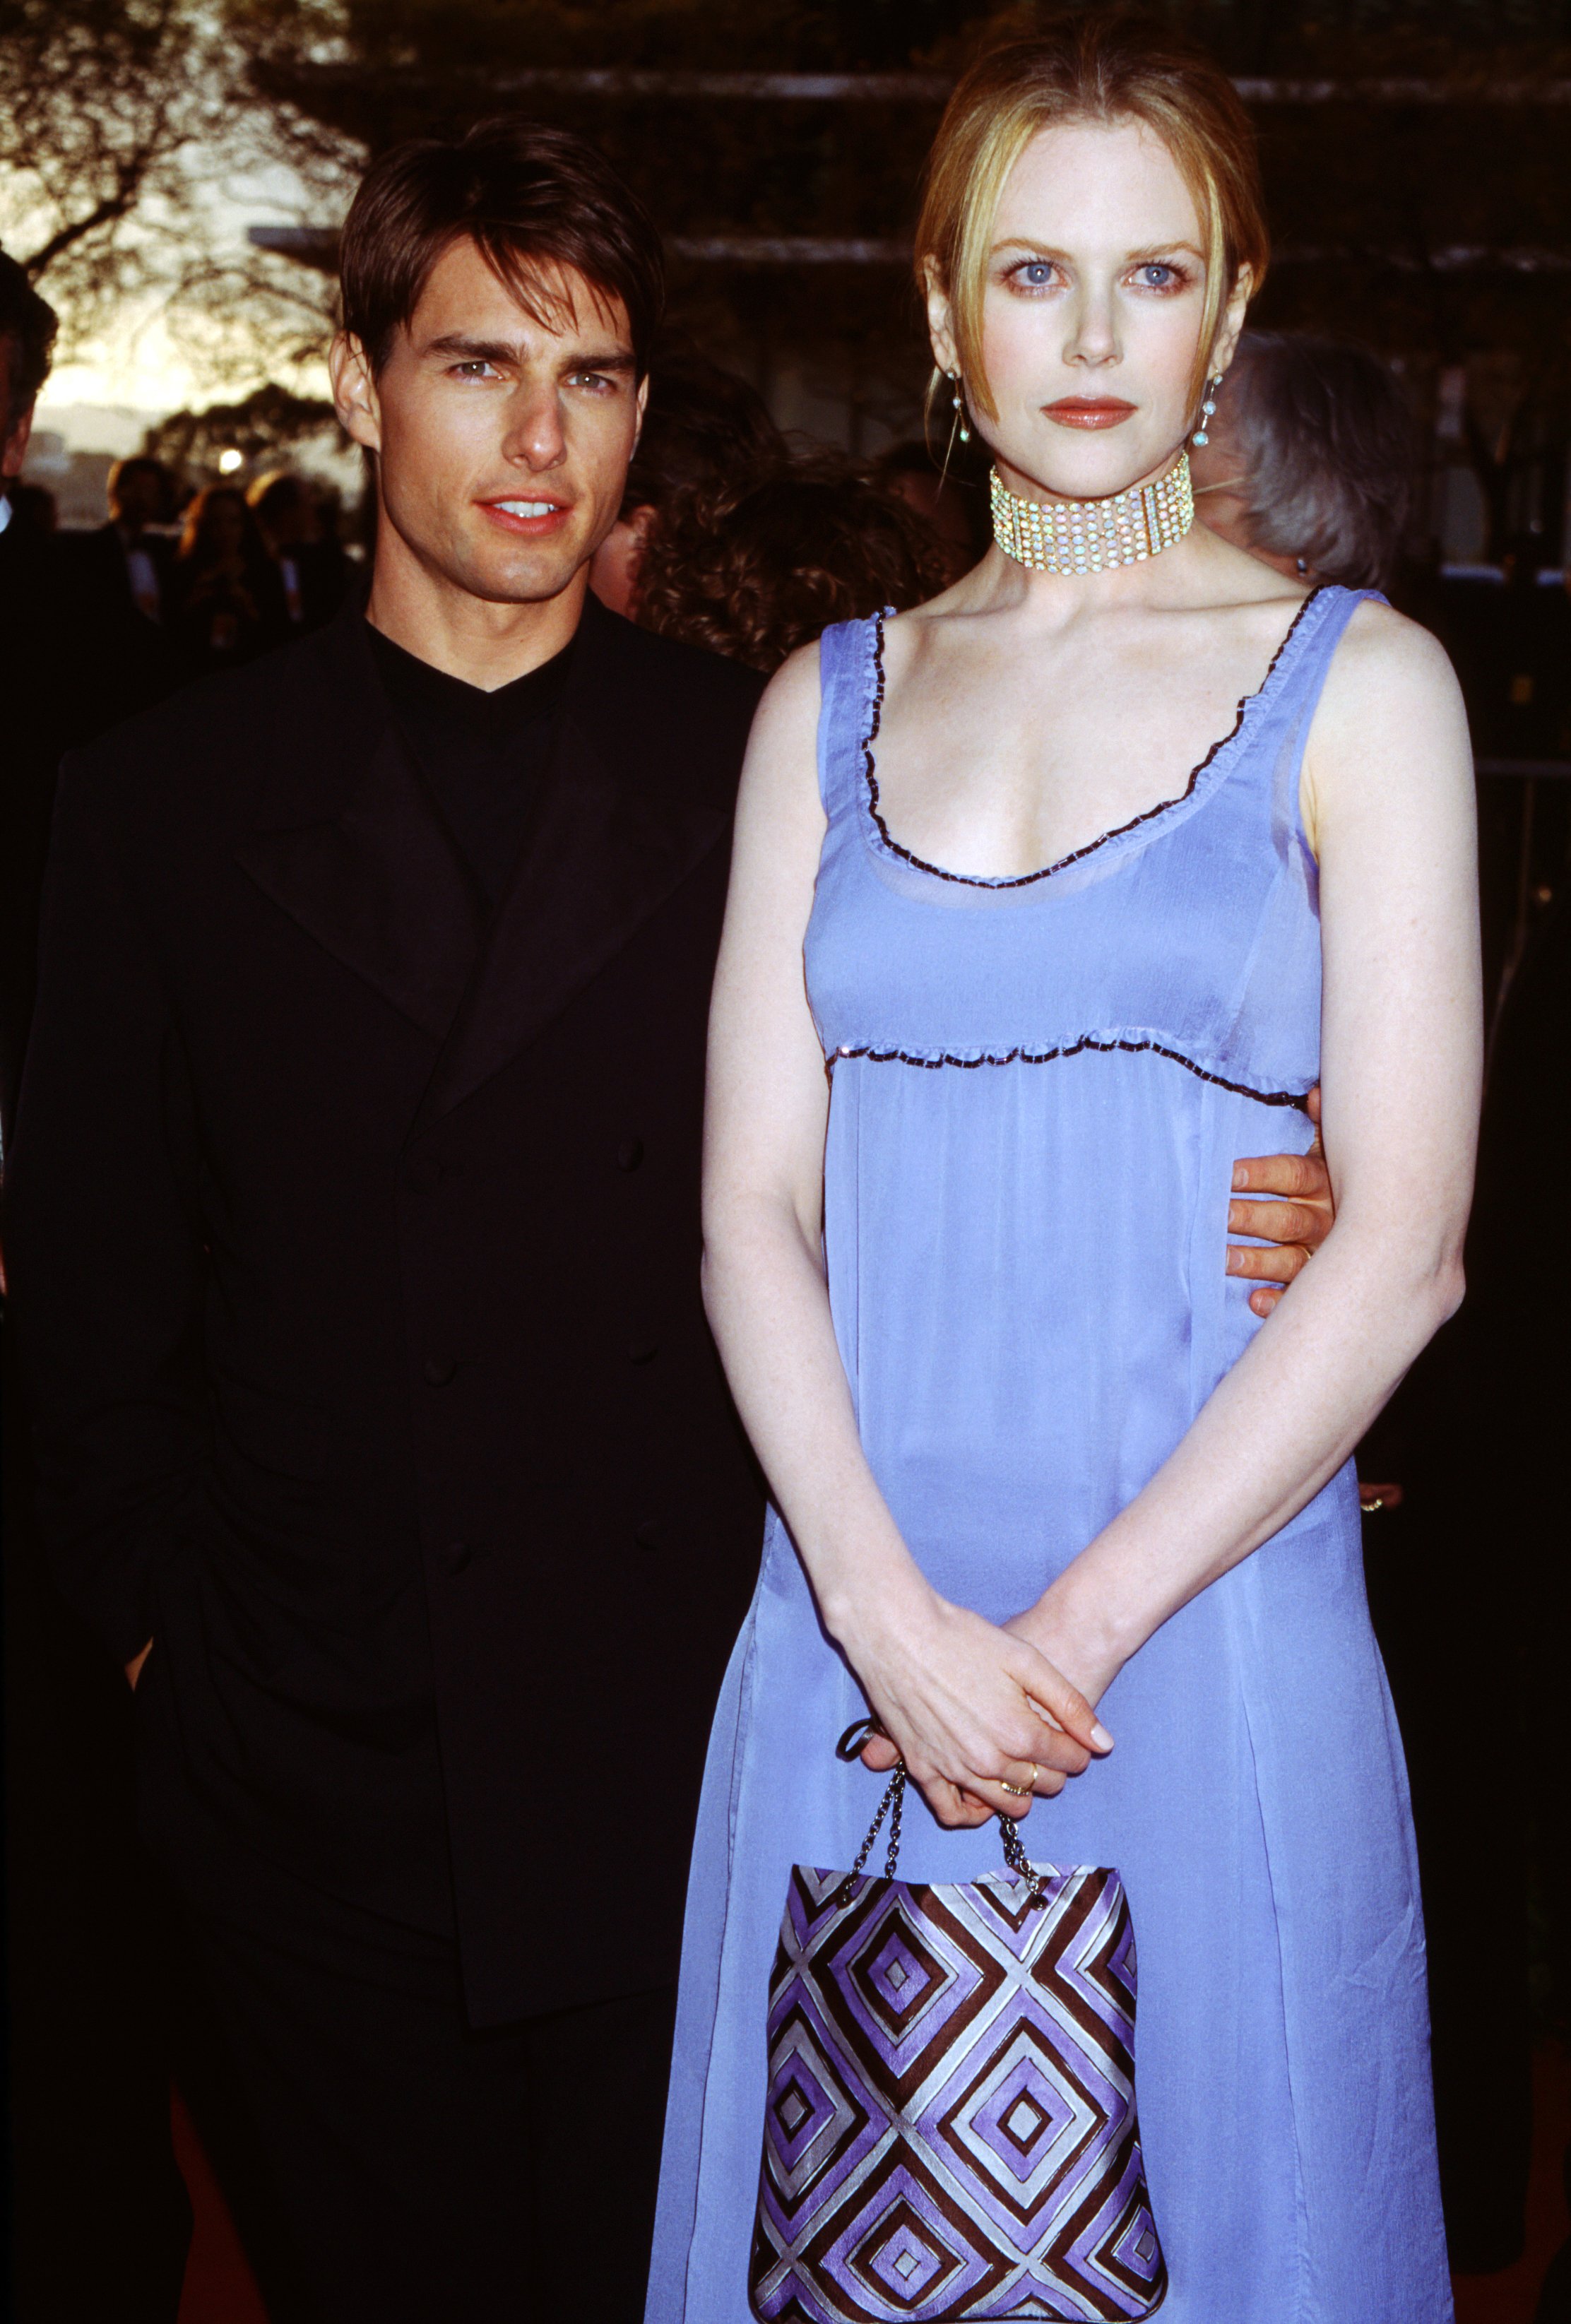 Actor Tom Cruise and actress Nicole Kidman attend the 68th Annual Academy Awards on March 25, 1996 at the Dorothy Chandler Pavilion, Los Angeles Music Center in Los Angeles, California. | Source: Getty Images